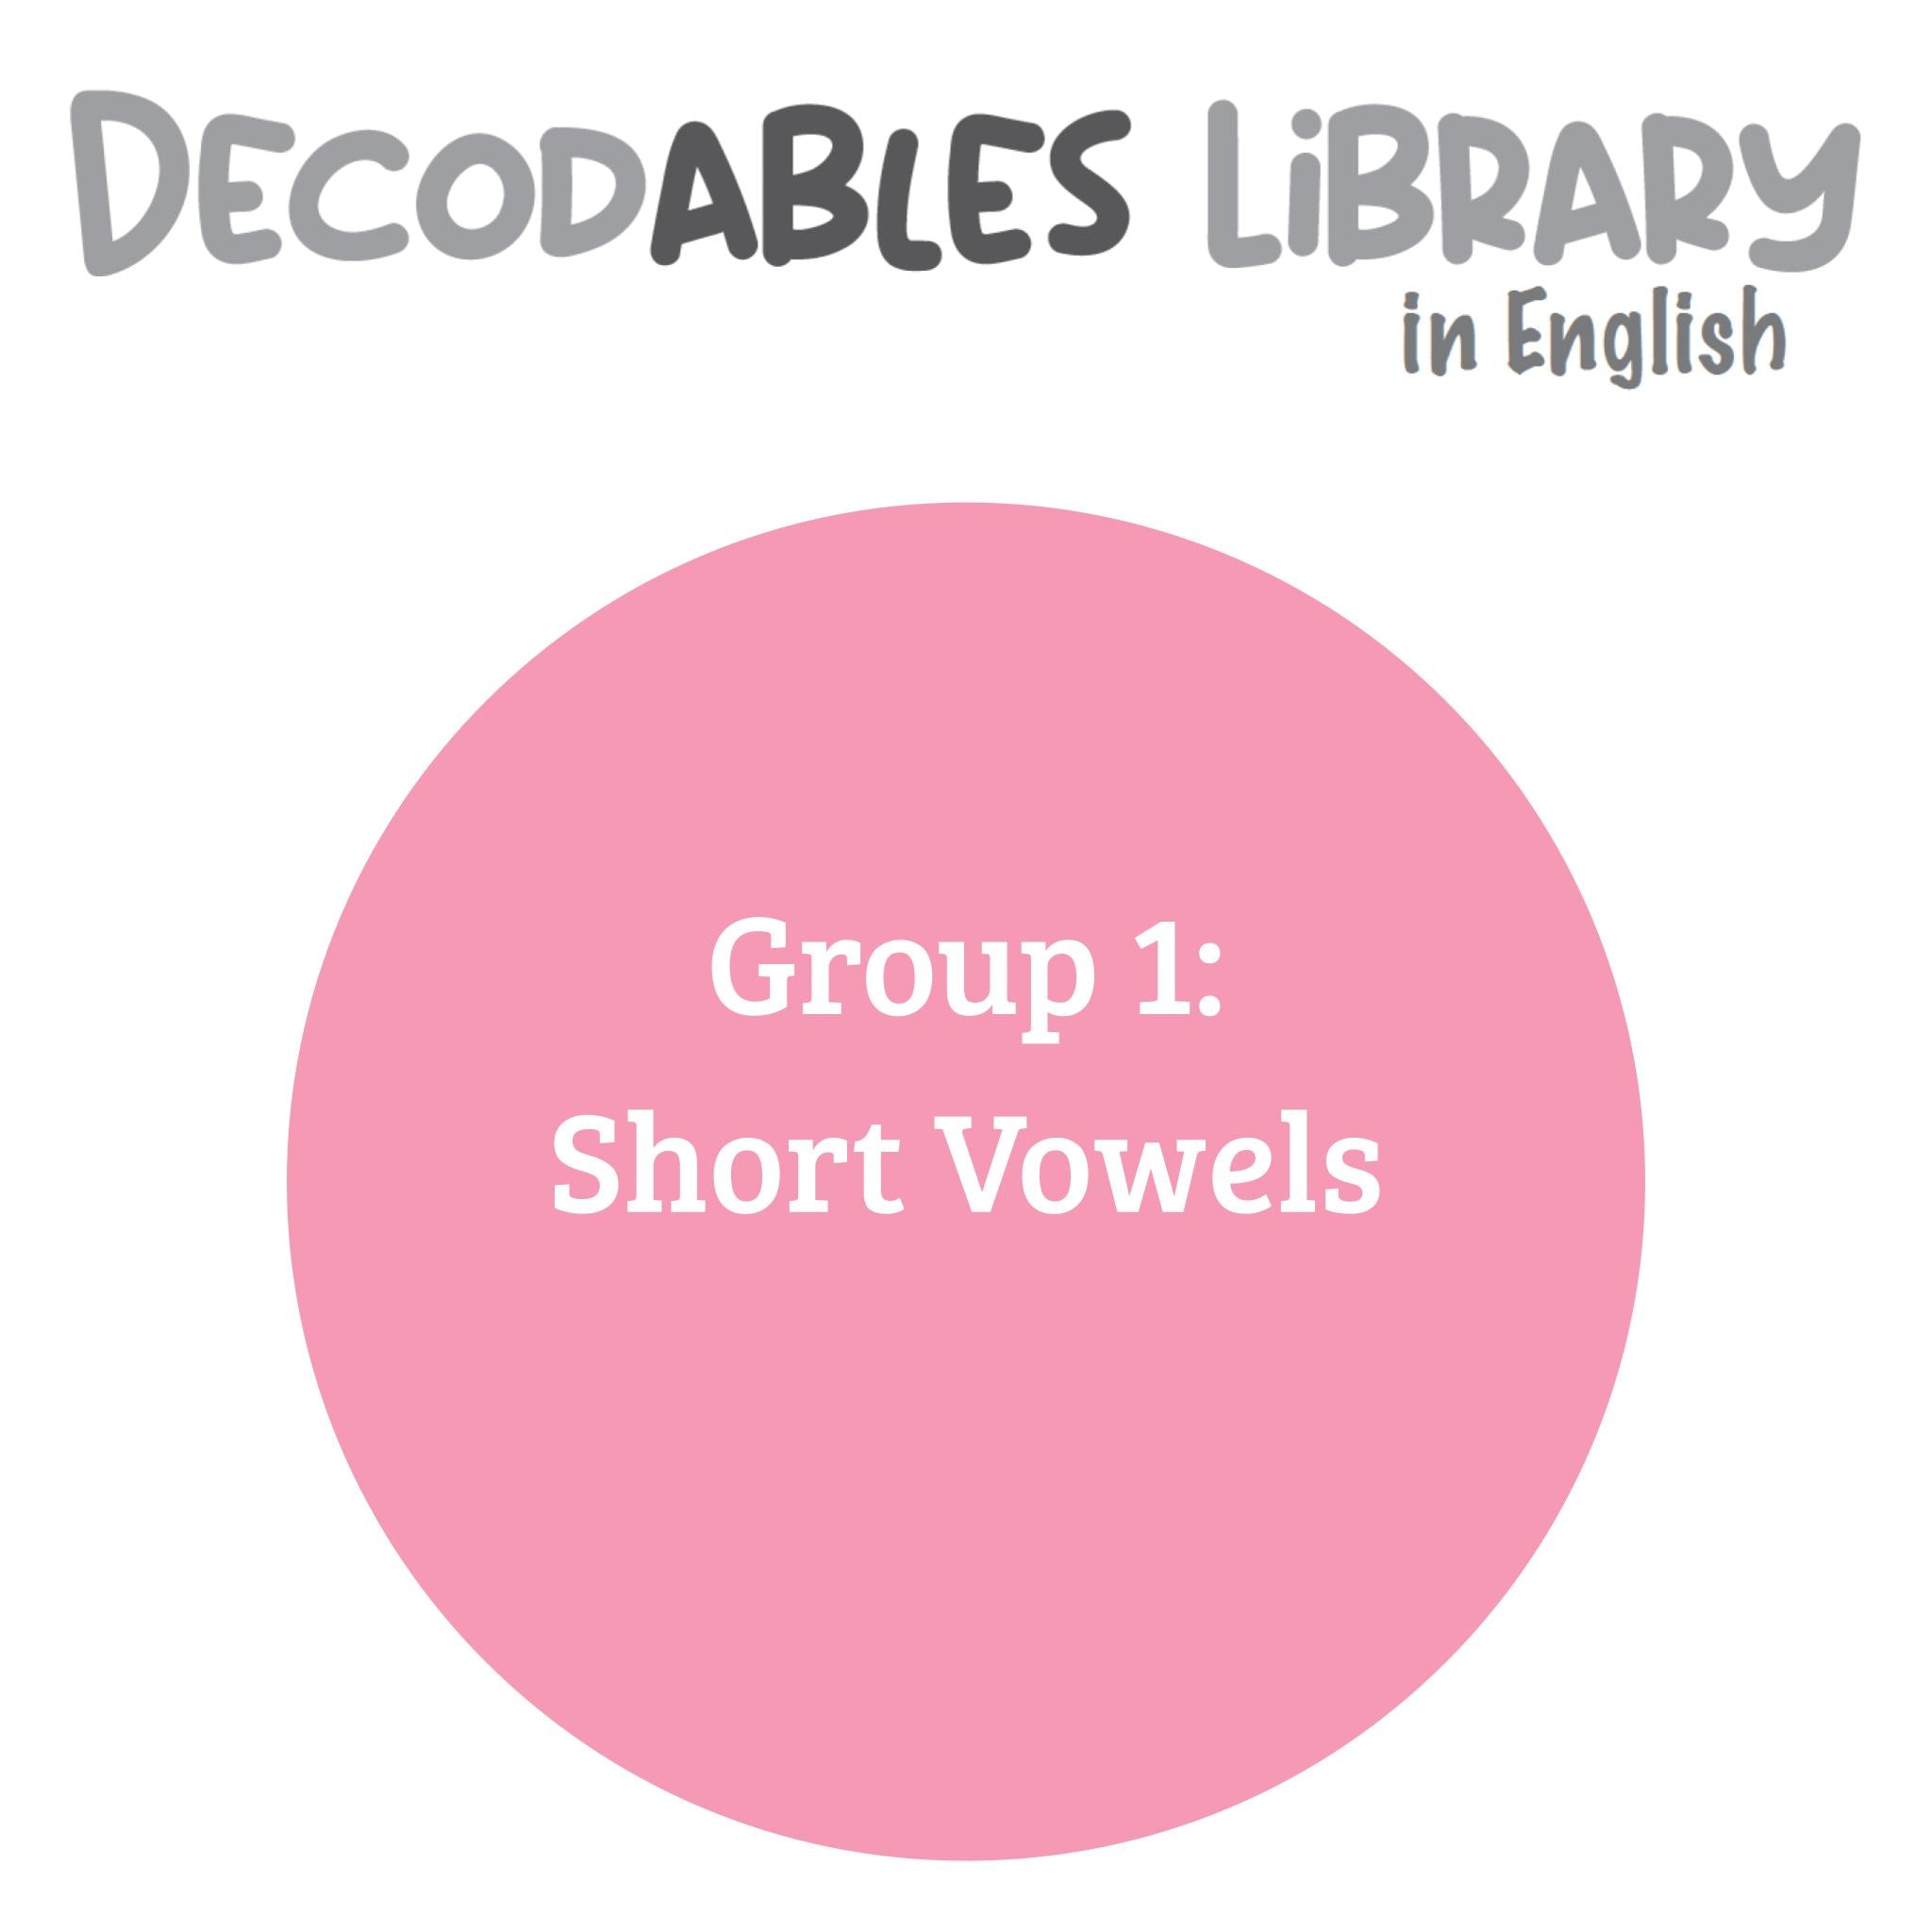 English Decodables Library - Group 1: Short Vowels (set of 25 titles)